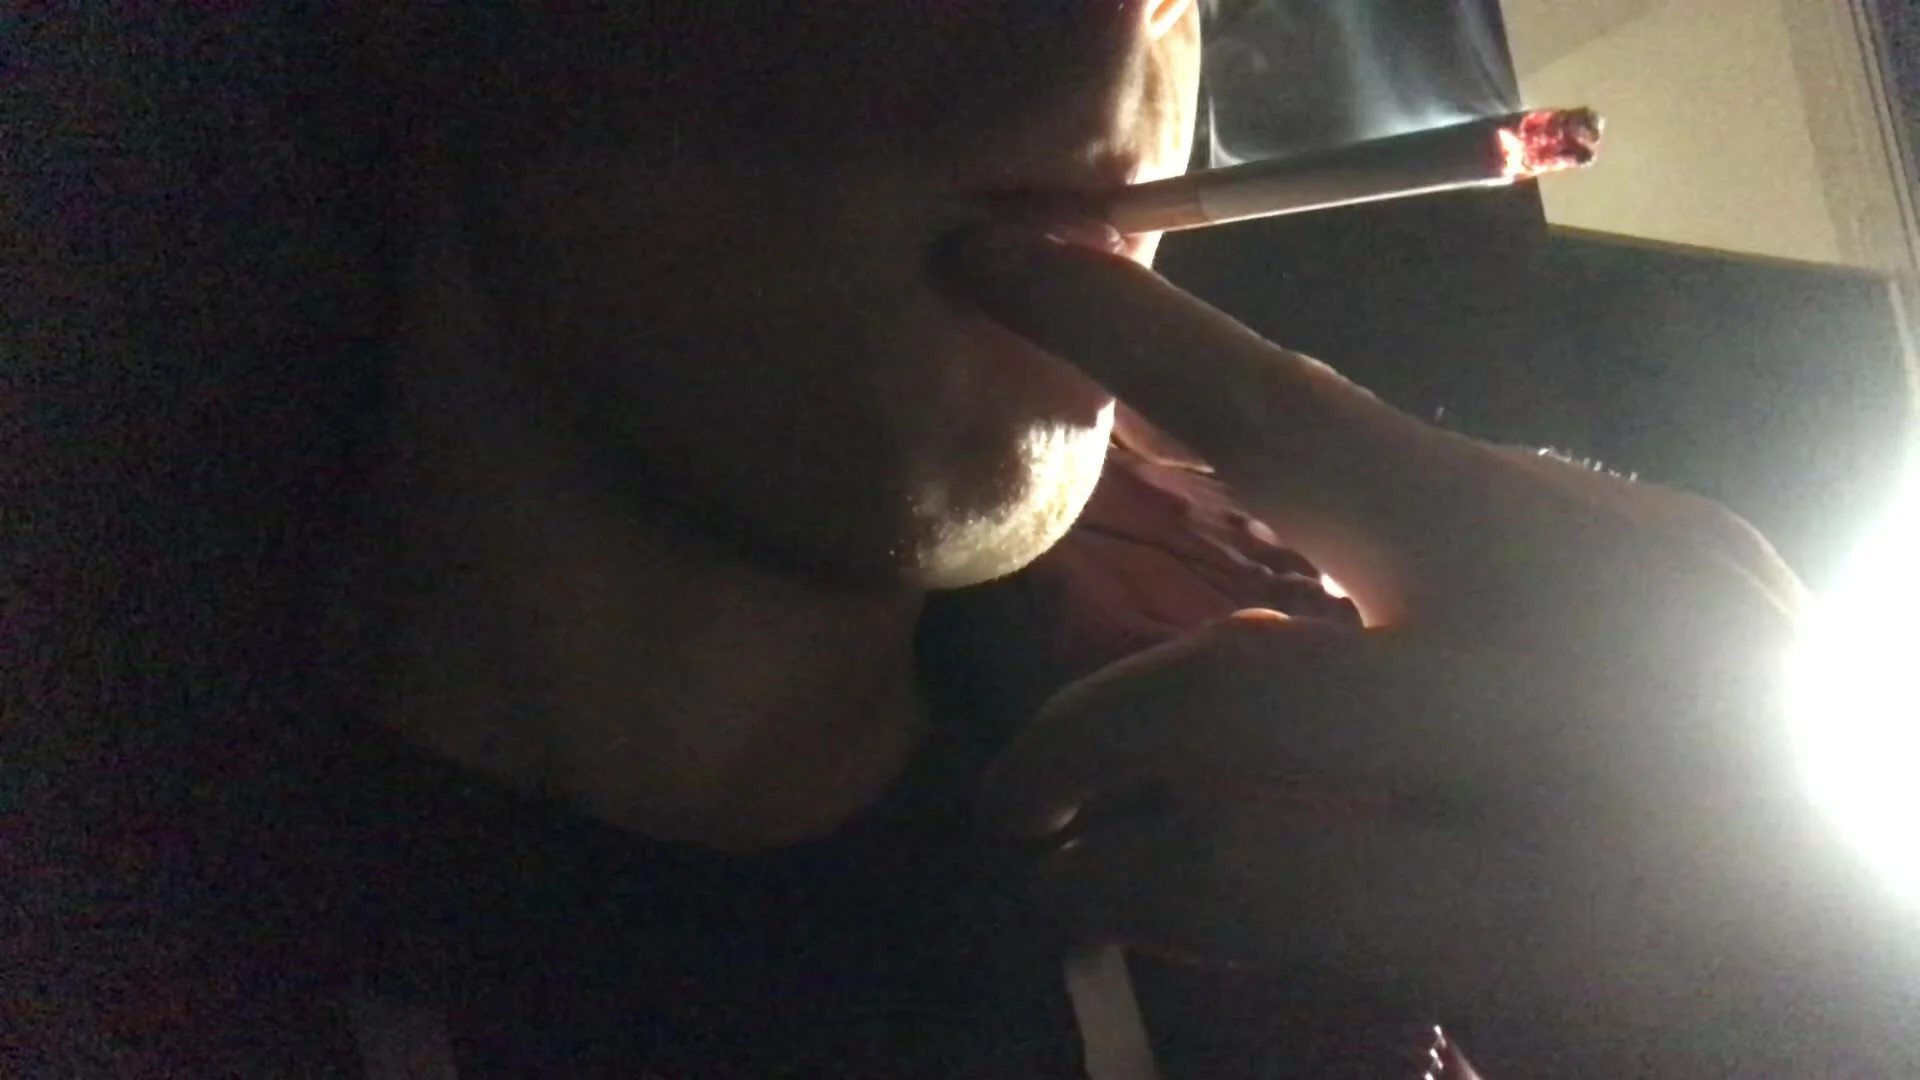 Marlboro Red Smoking in the Middle of the Night pic